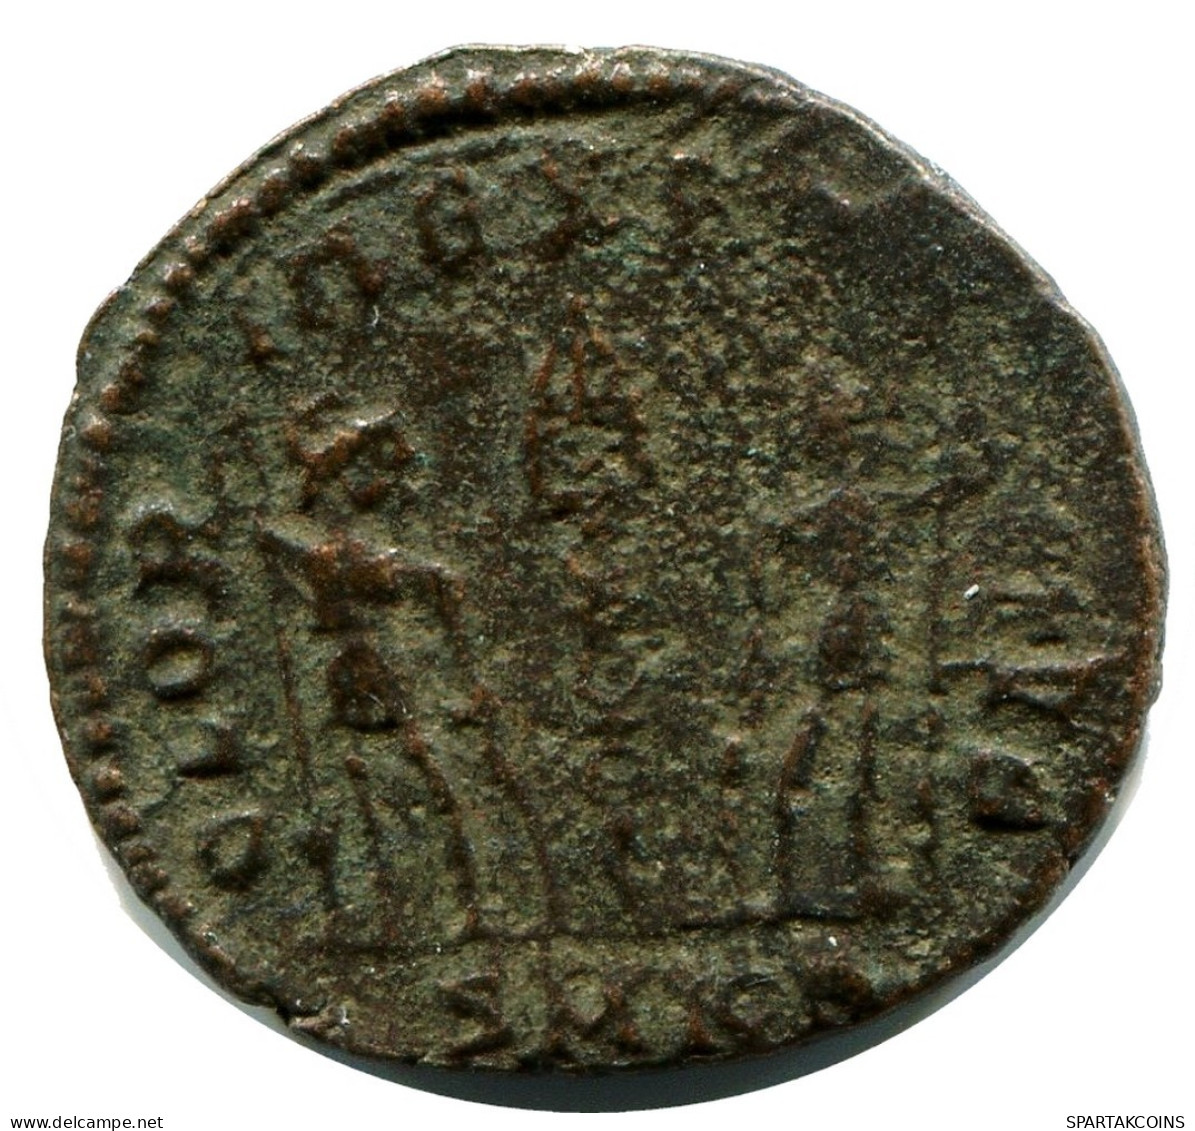 CONSTANS MINTED IN CYZICUS FROM THE ROYAL ONTARIO MUSEUM #ANC11602.14.D.A - El Impero Christiano (307 / 363)